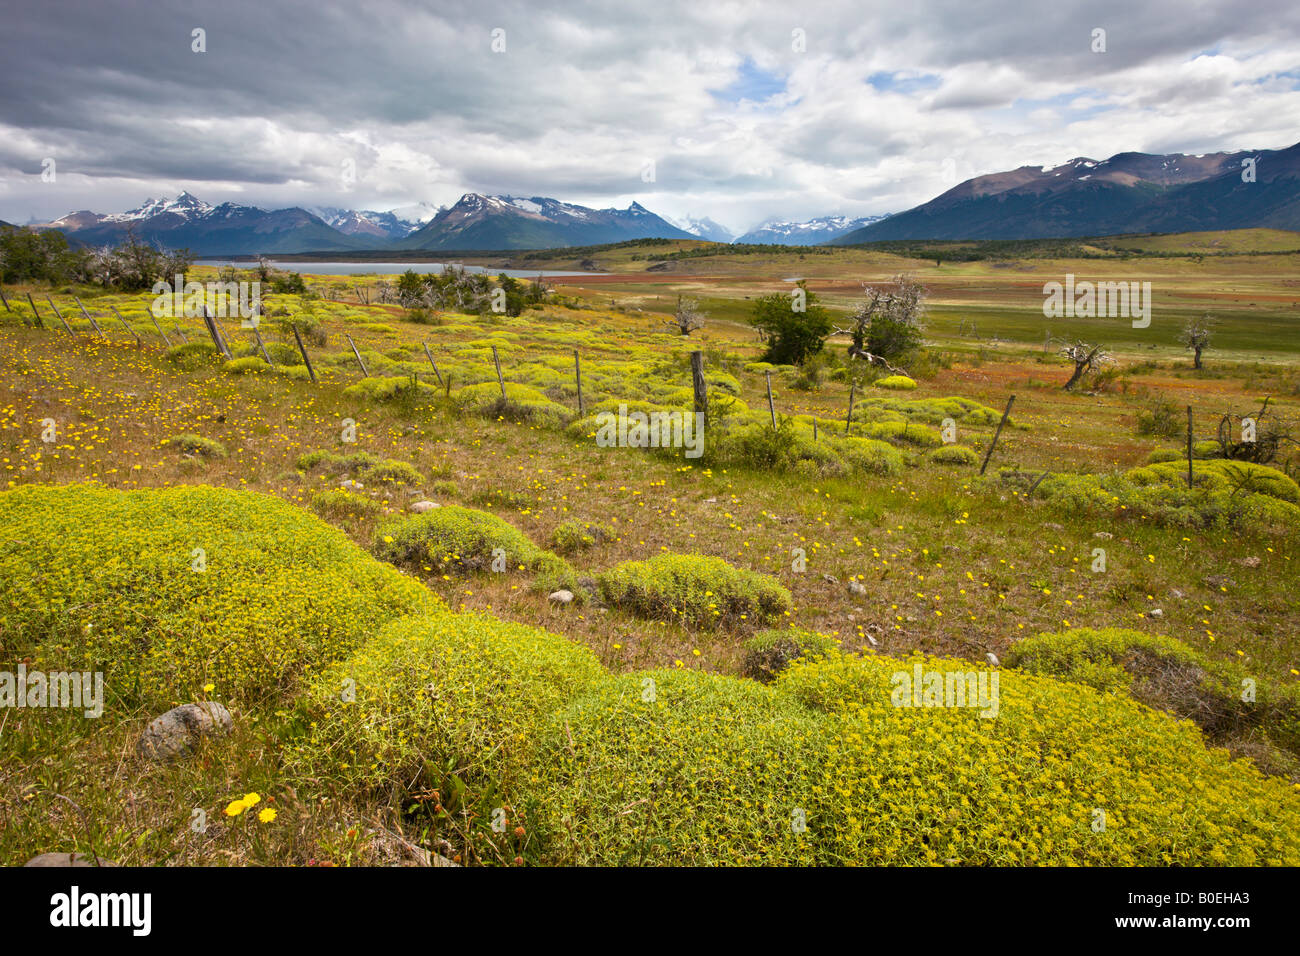 Blooming plants turn the Patagonian meadows yellow in summer El Calafate Argentina Stock Photo